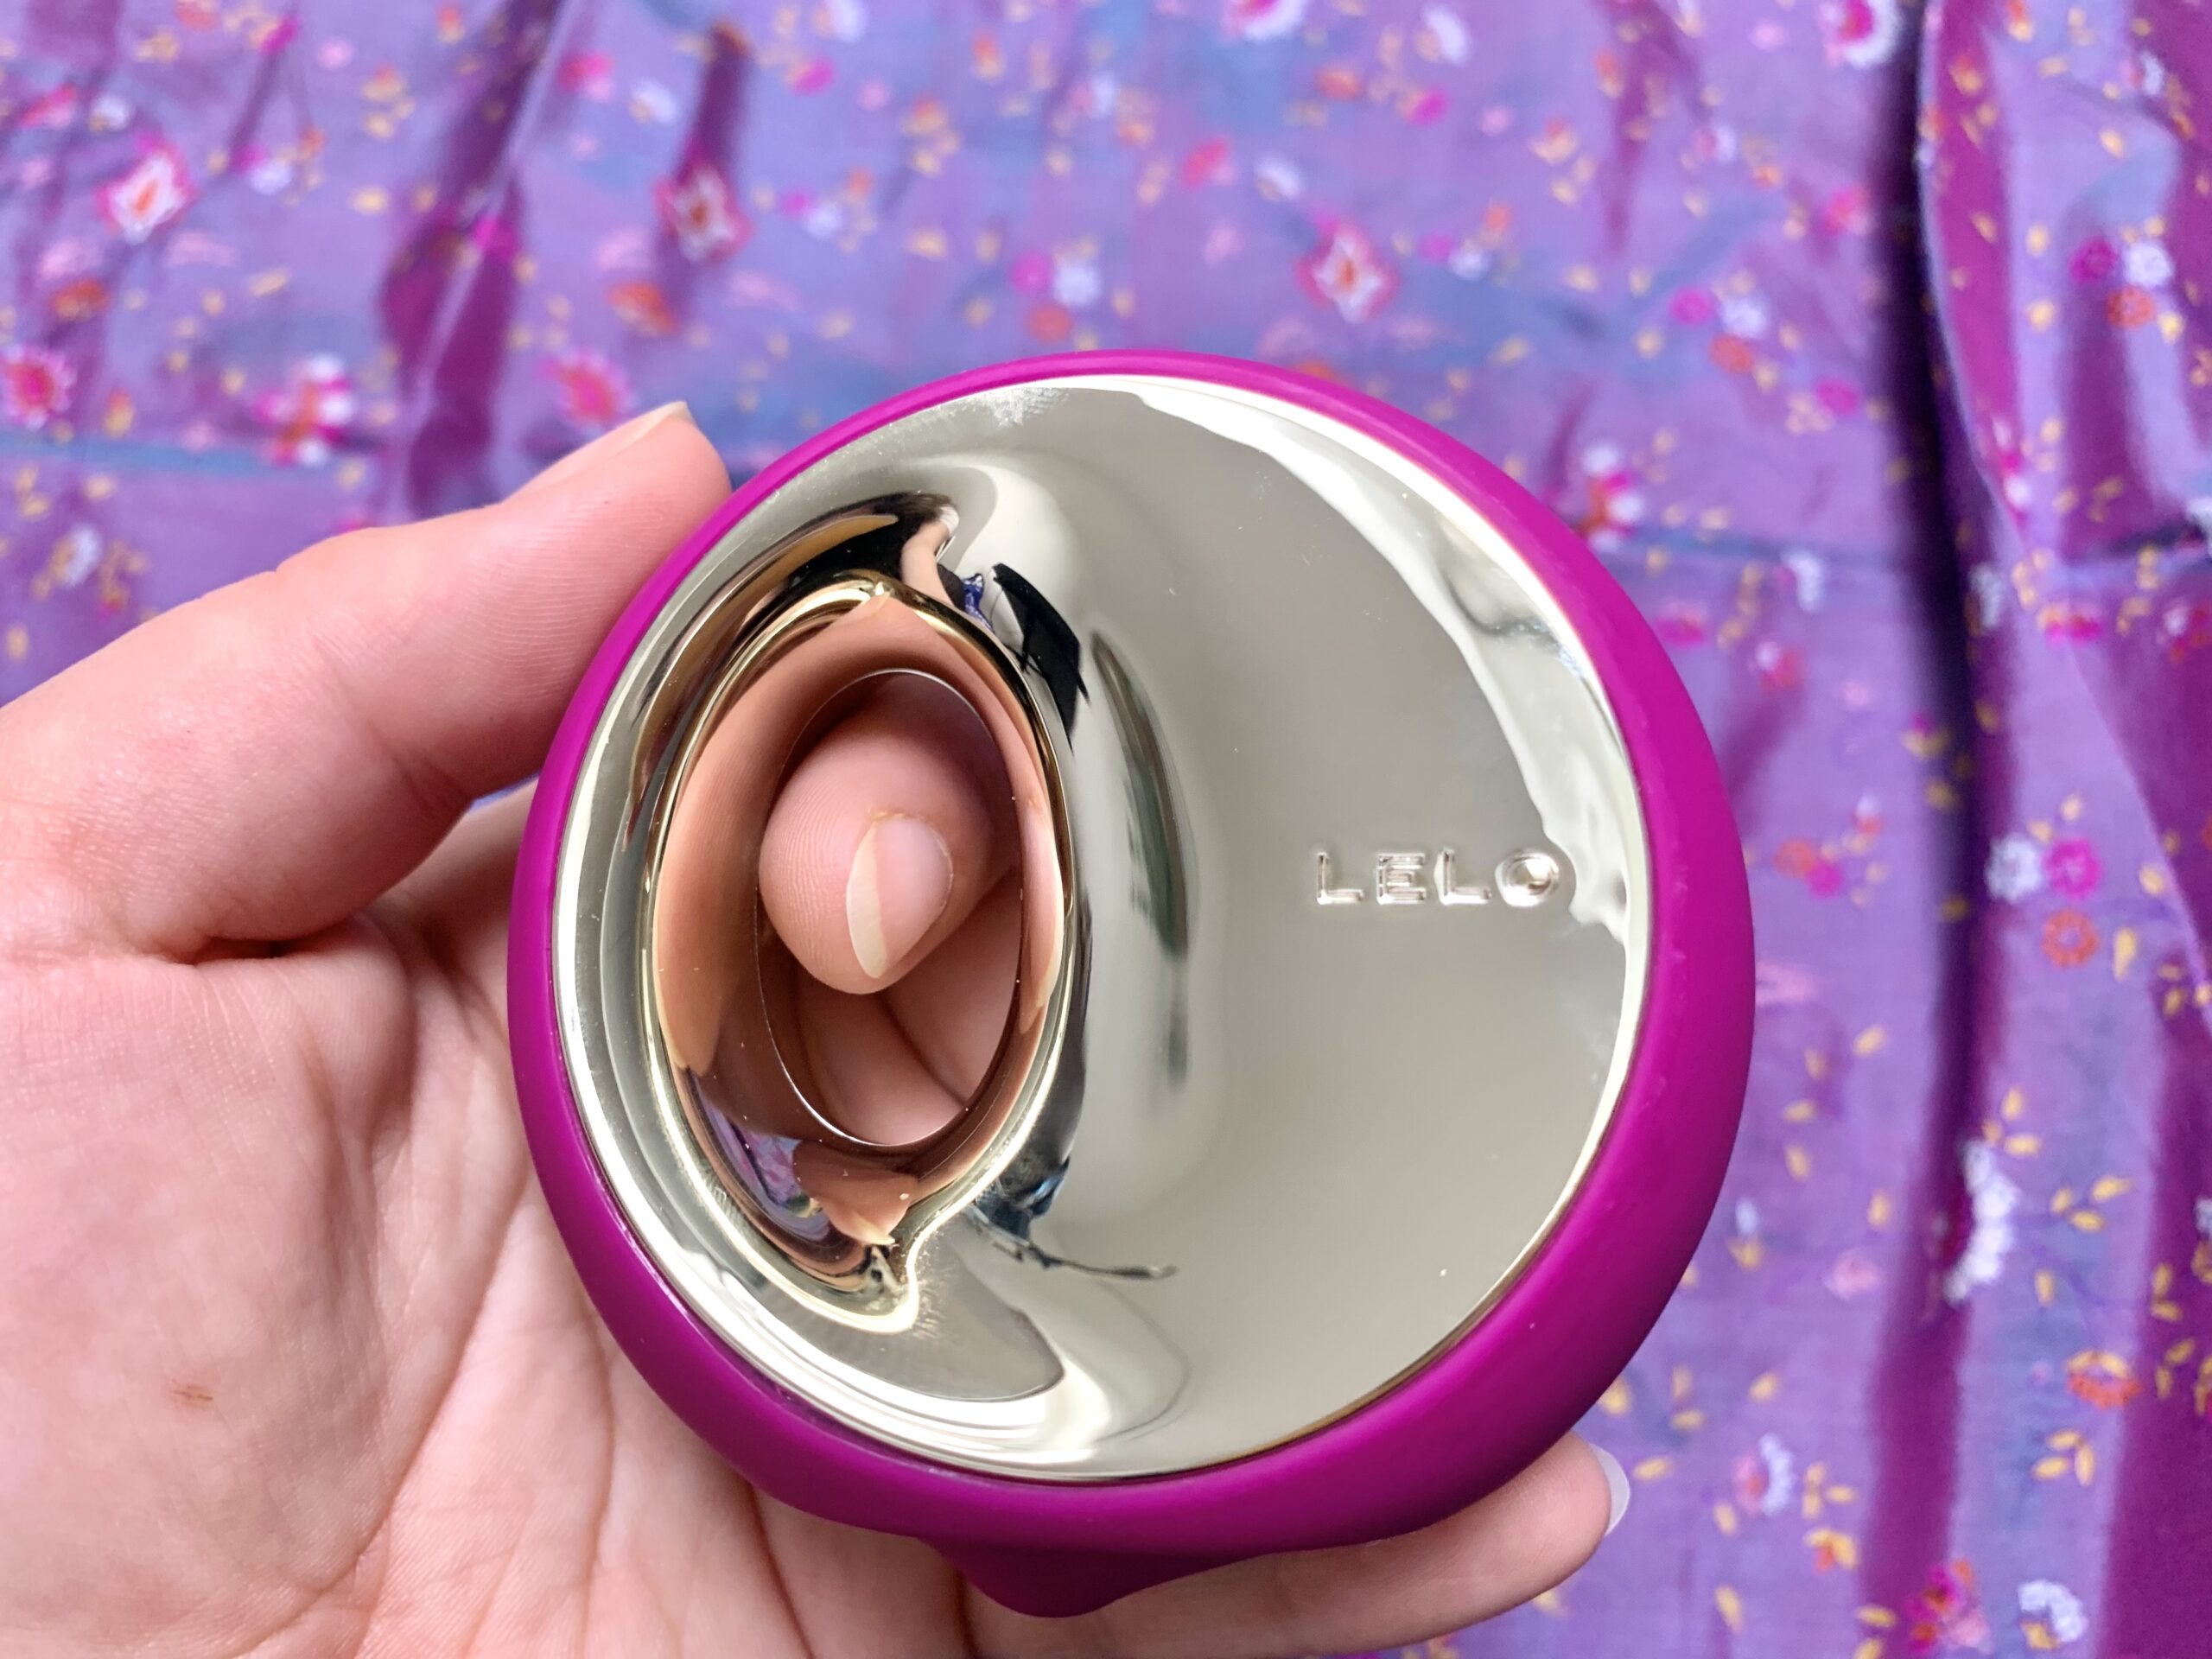 My Personal Experiences with Lelo Ora 3